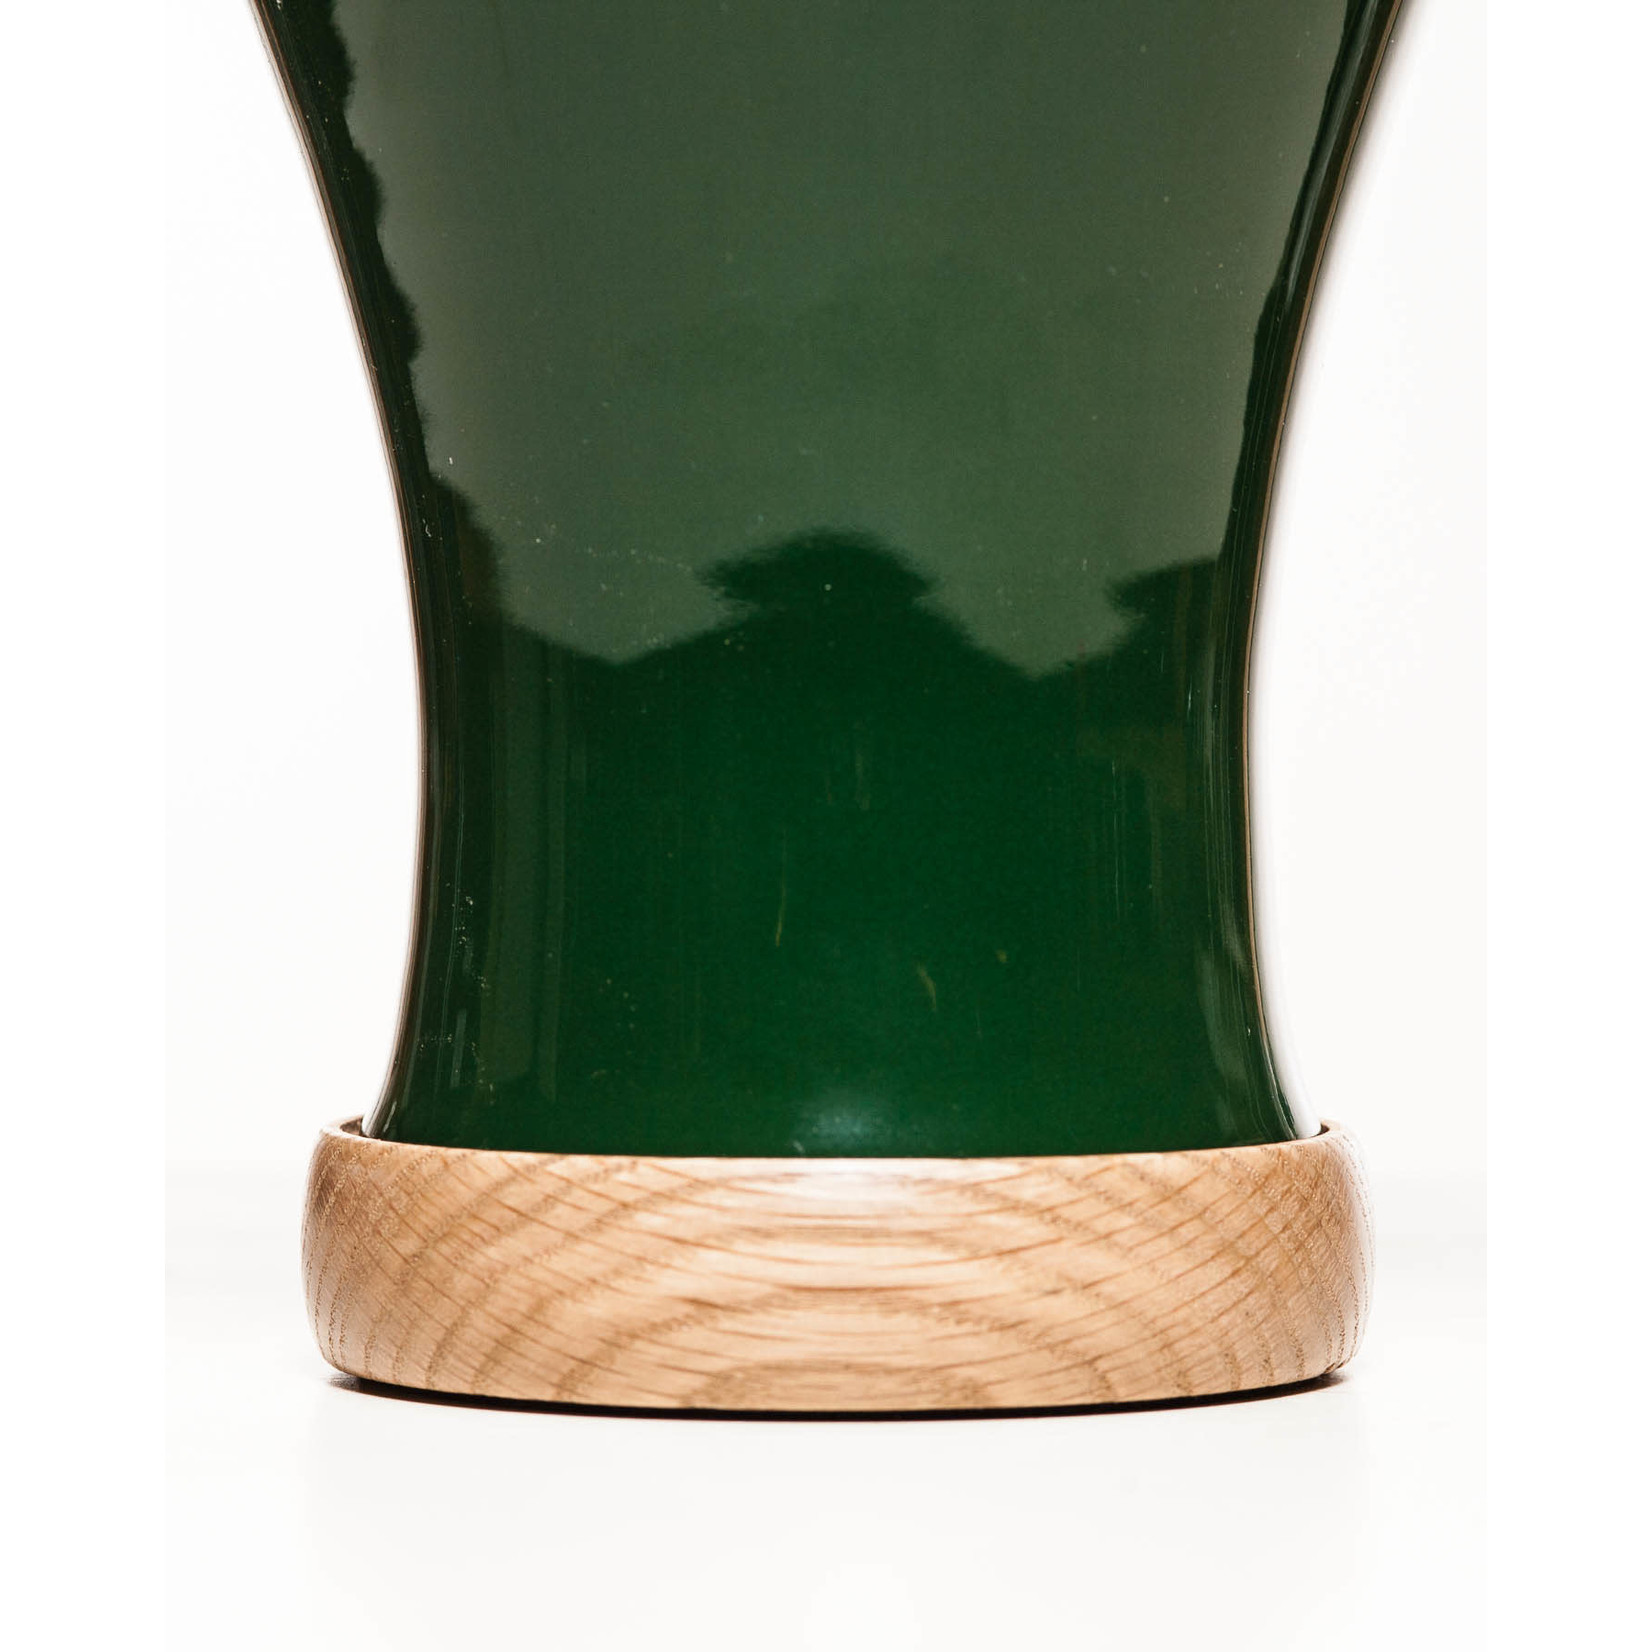 Lawrence & Scott Gabrielle Table Lamp in Racing Green with Walnut Base (Showroom Sample)